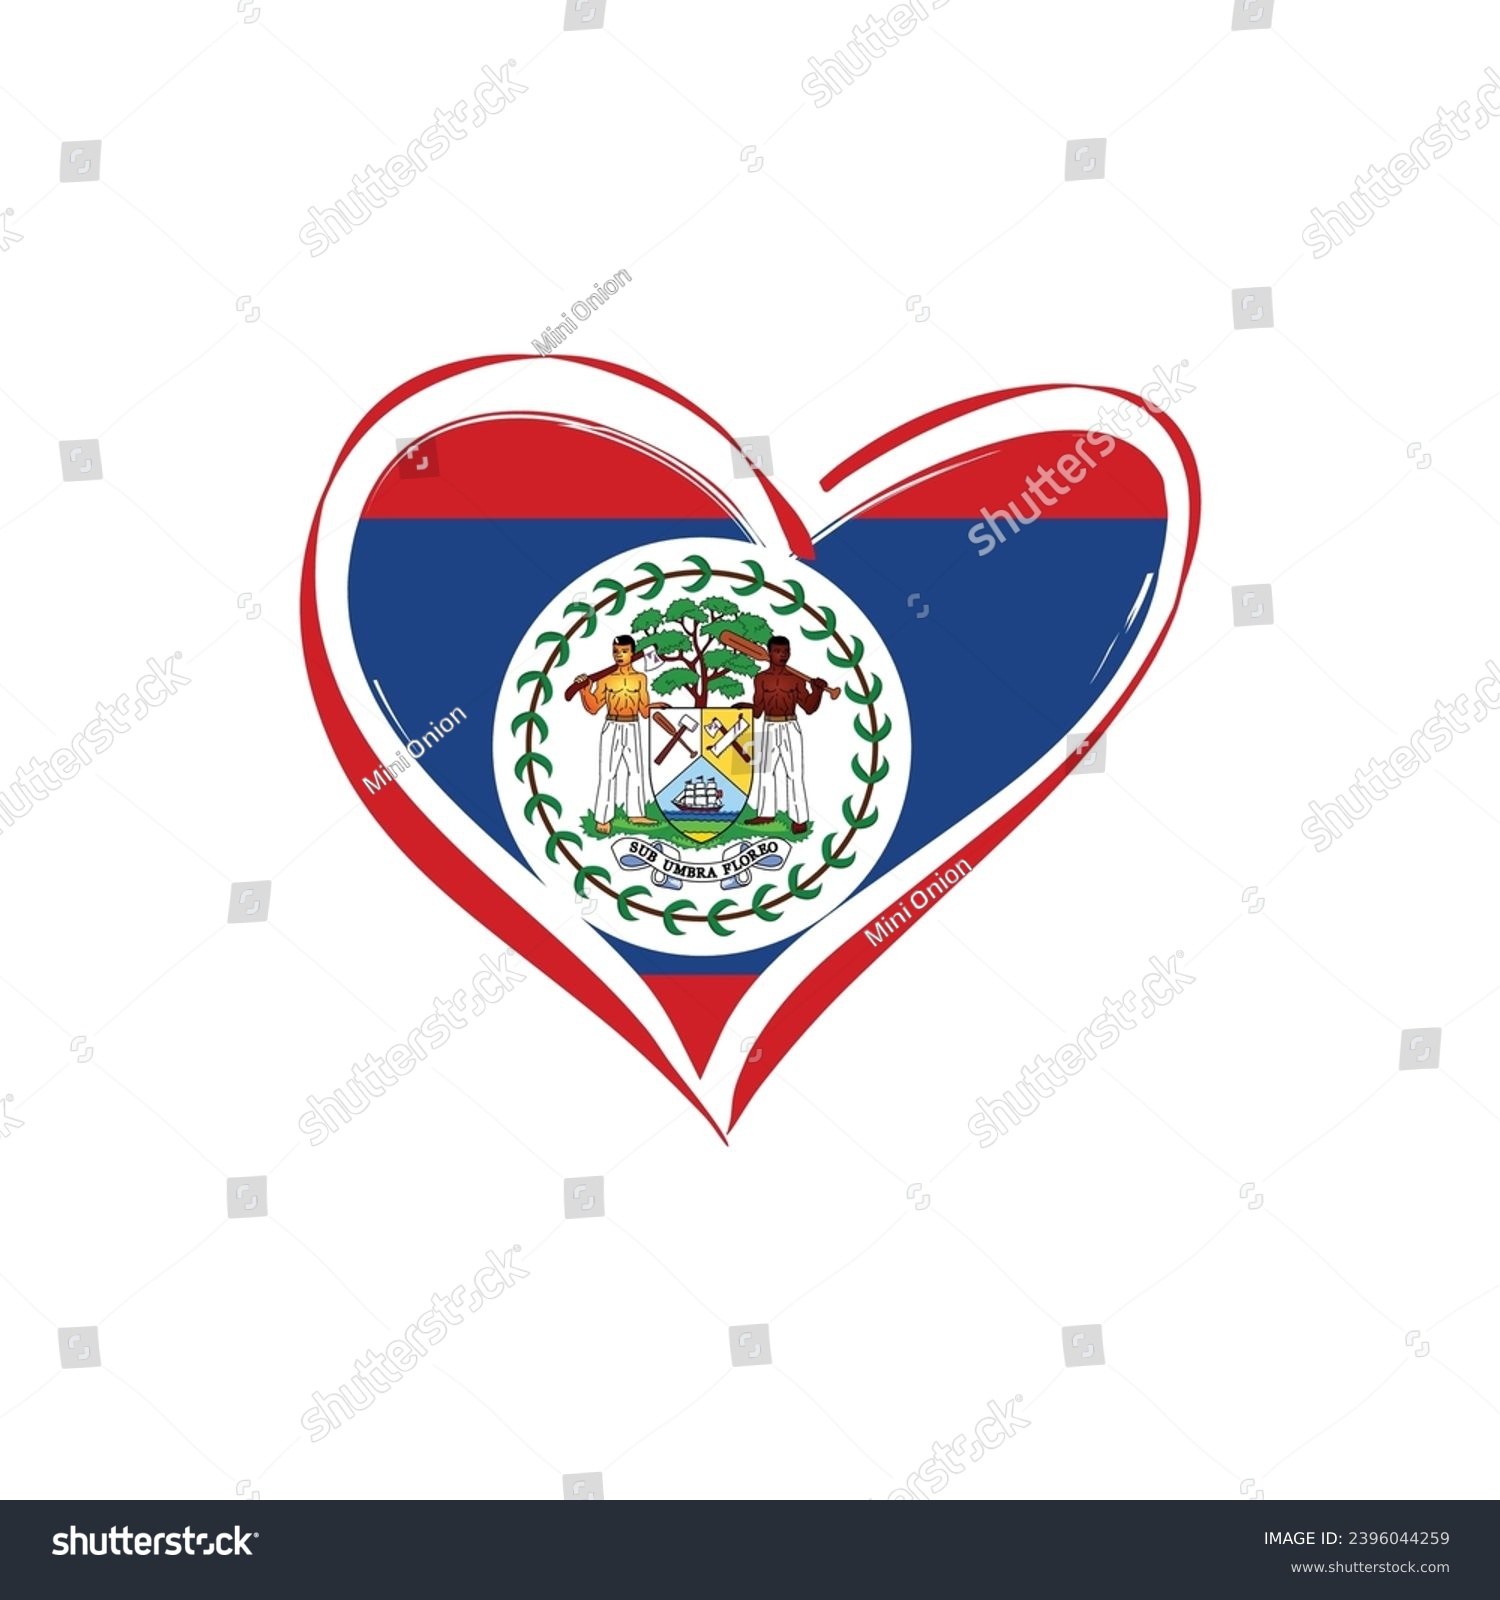 Belize flag with a heart shape, isolated on a white background for Belize Independence Day. Vector illustration. #2396044259